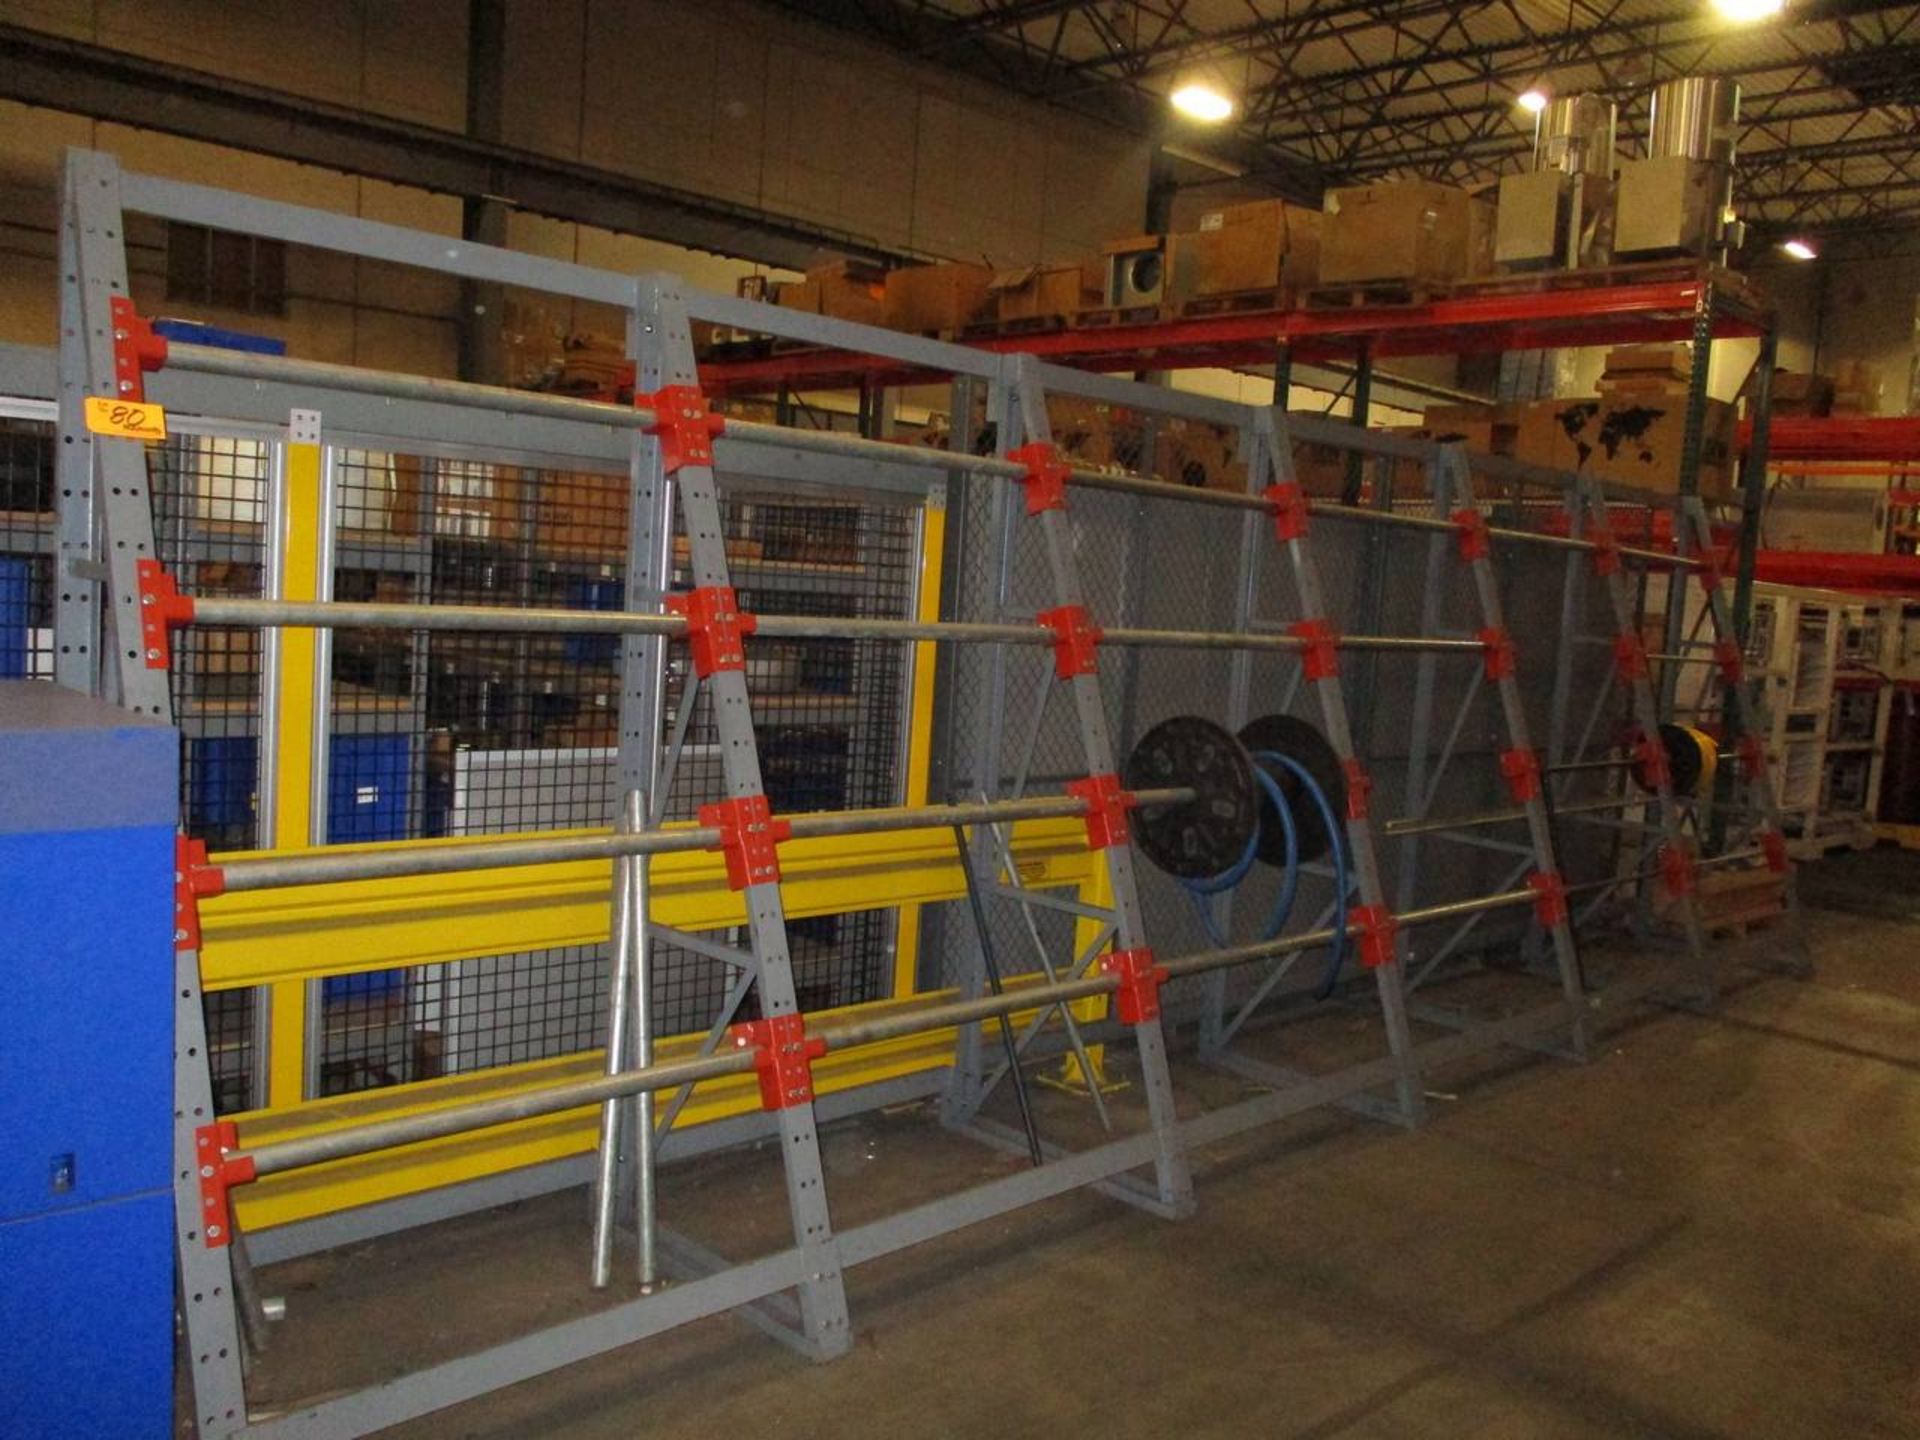 Meco Six-Section Reel Storage Rack - Image 2 of 4